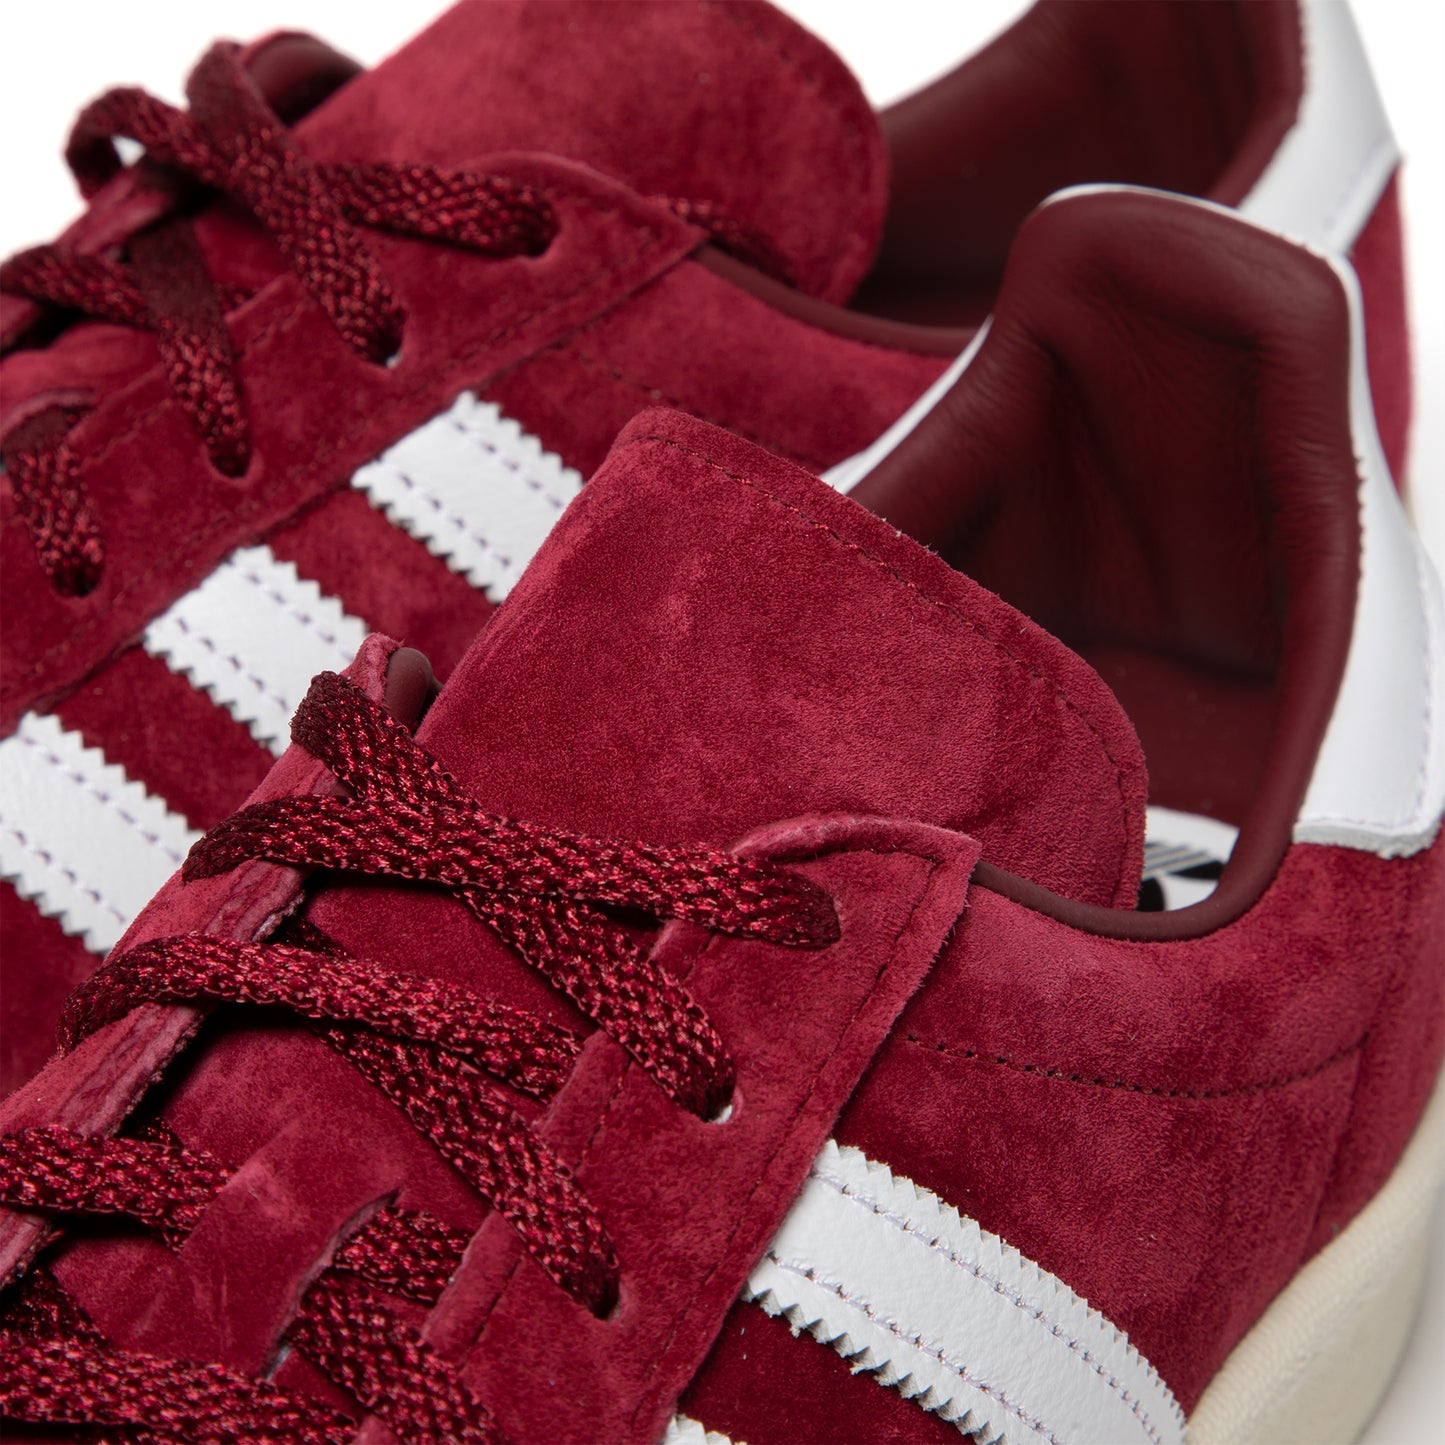 adidas Campus 80s Burgundy/Cloud White/Off – Concepts